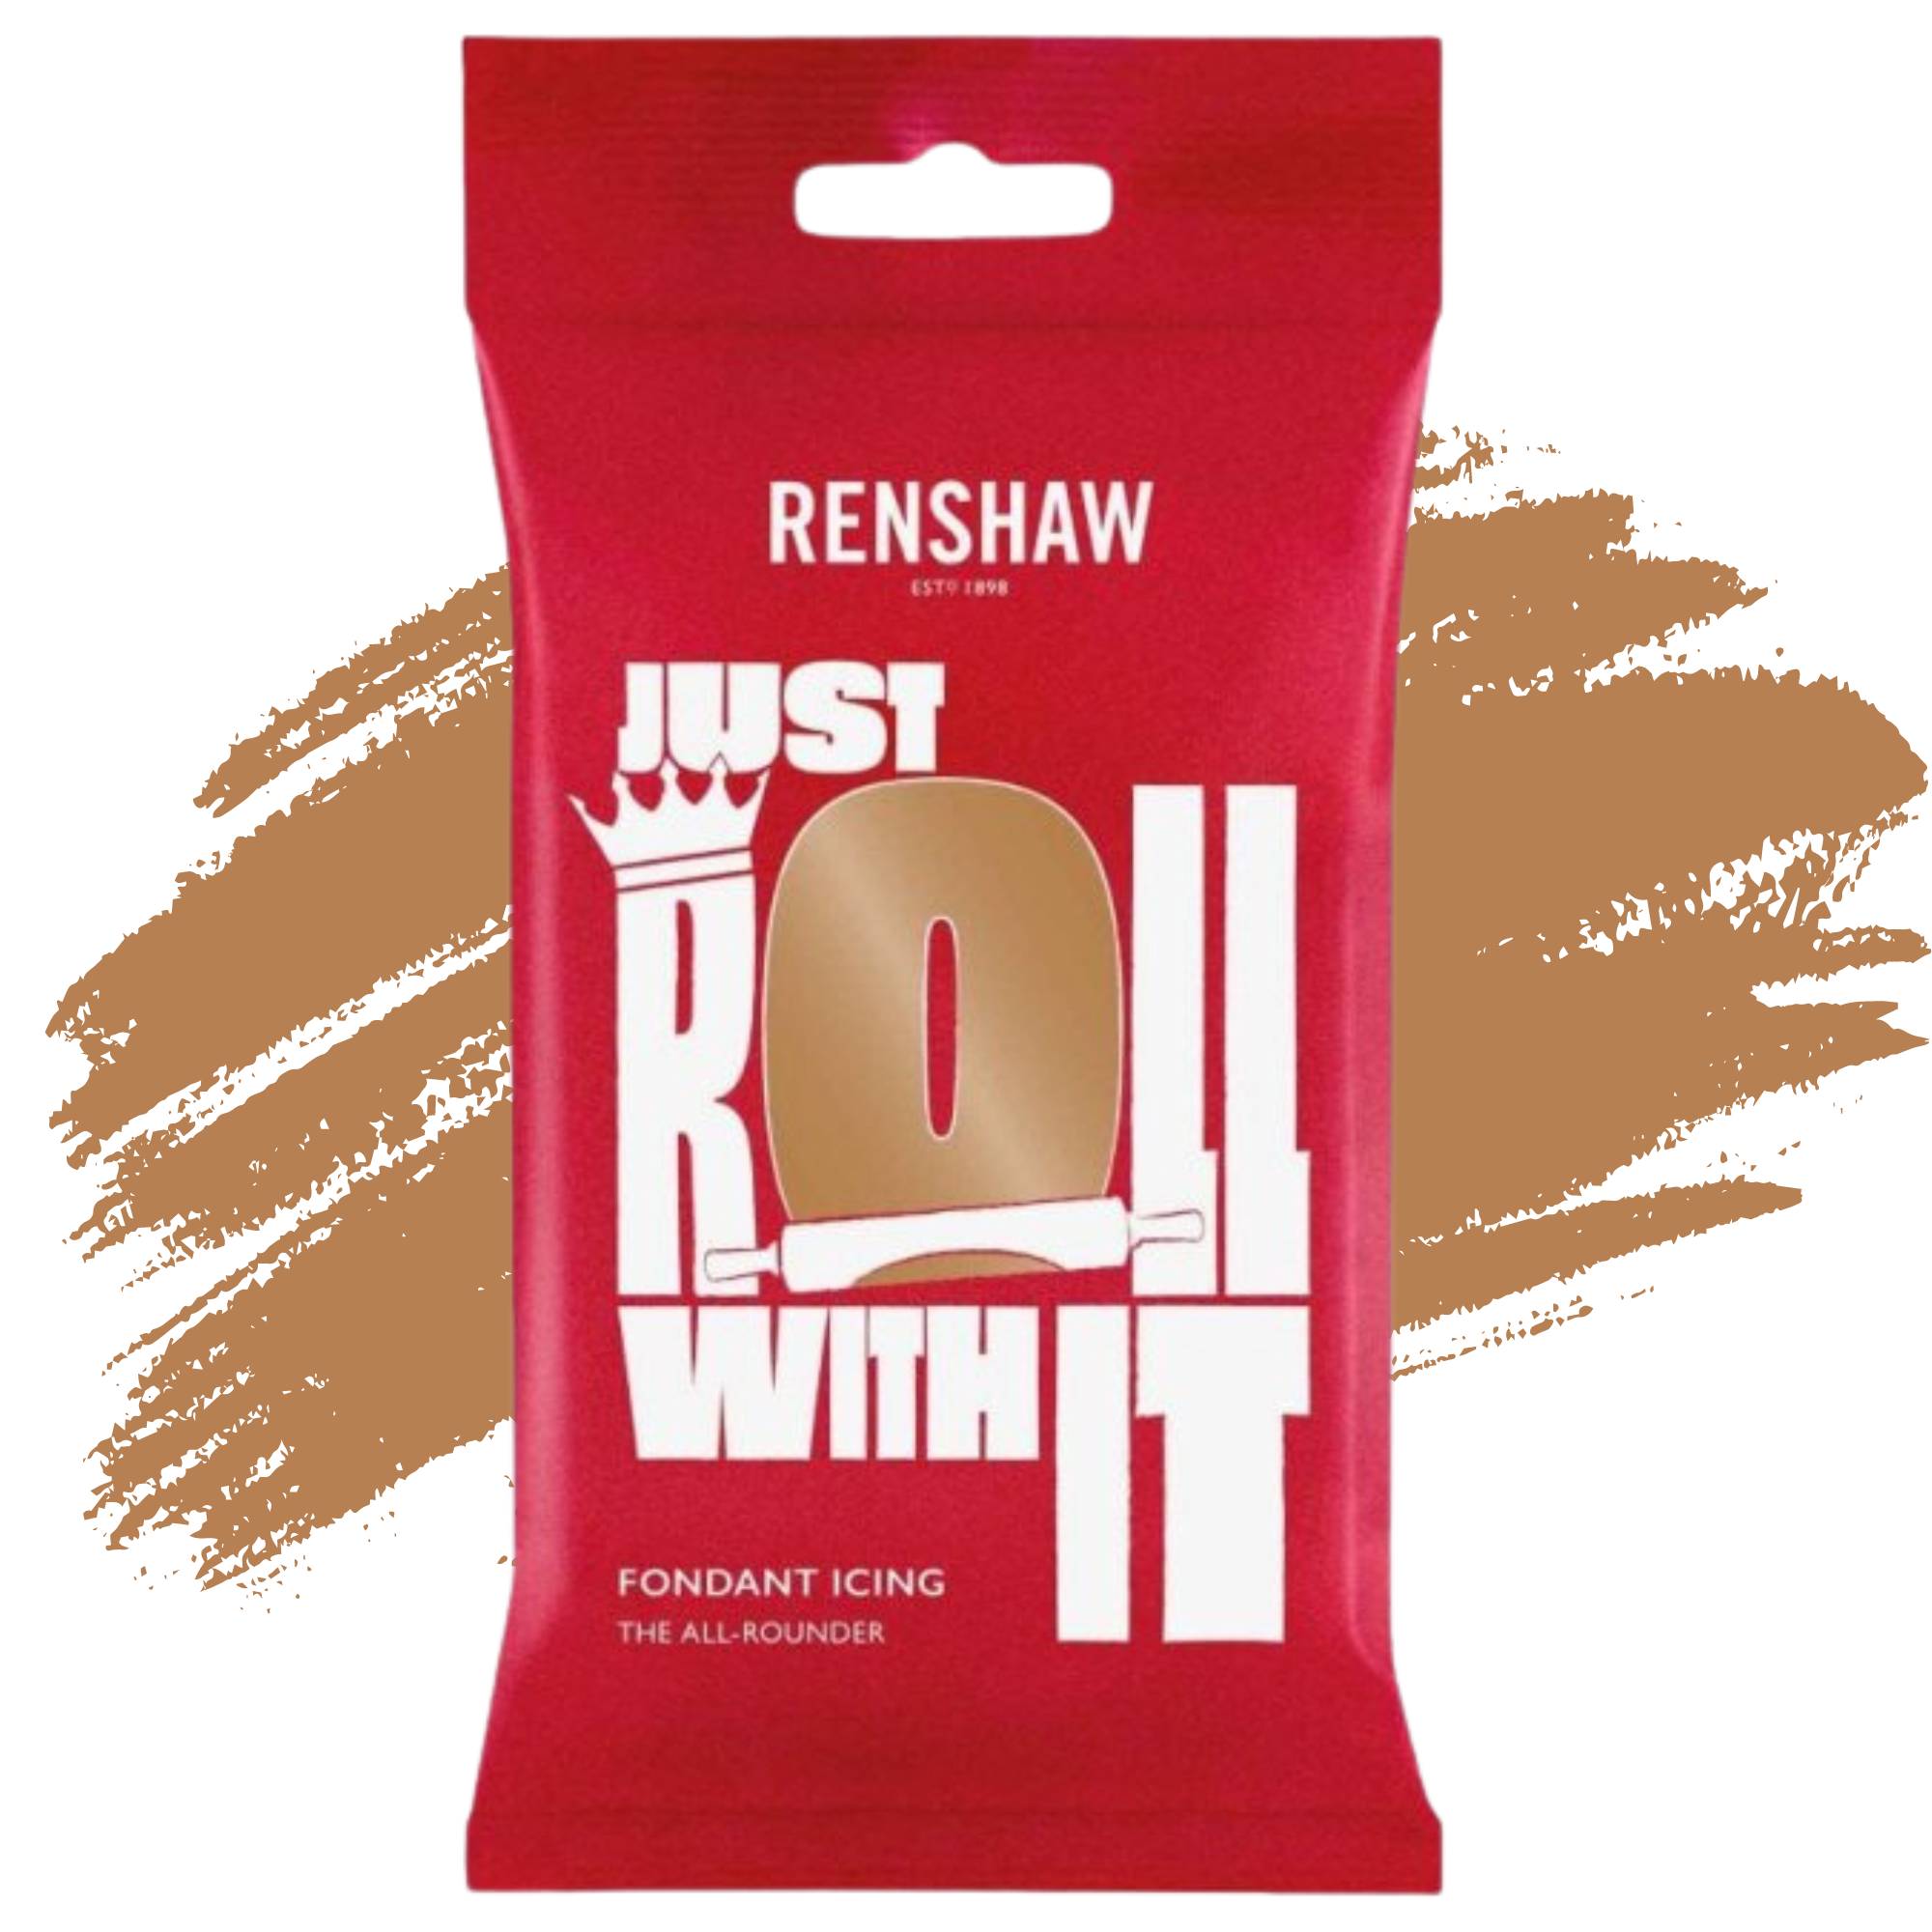 Renshaw Professional Sugar Paste Ready to Roll Fondant Just Roll with it Icing - Teddy Bear Brown - 250g